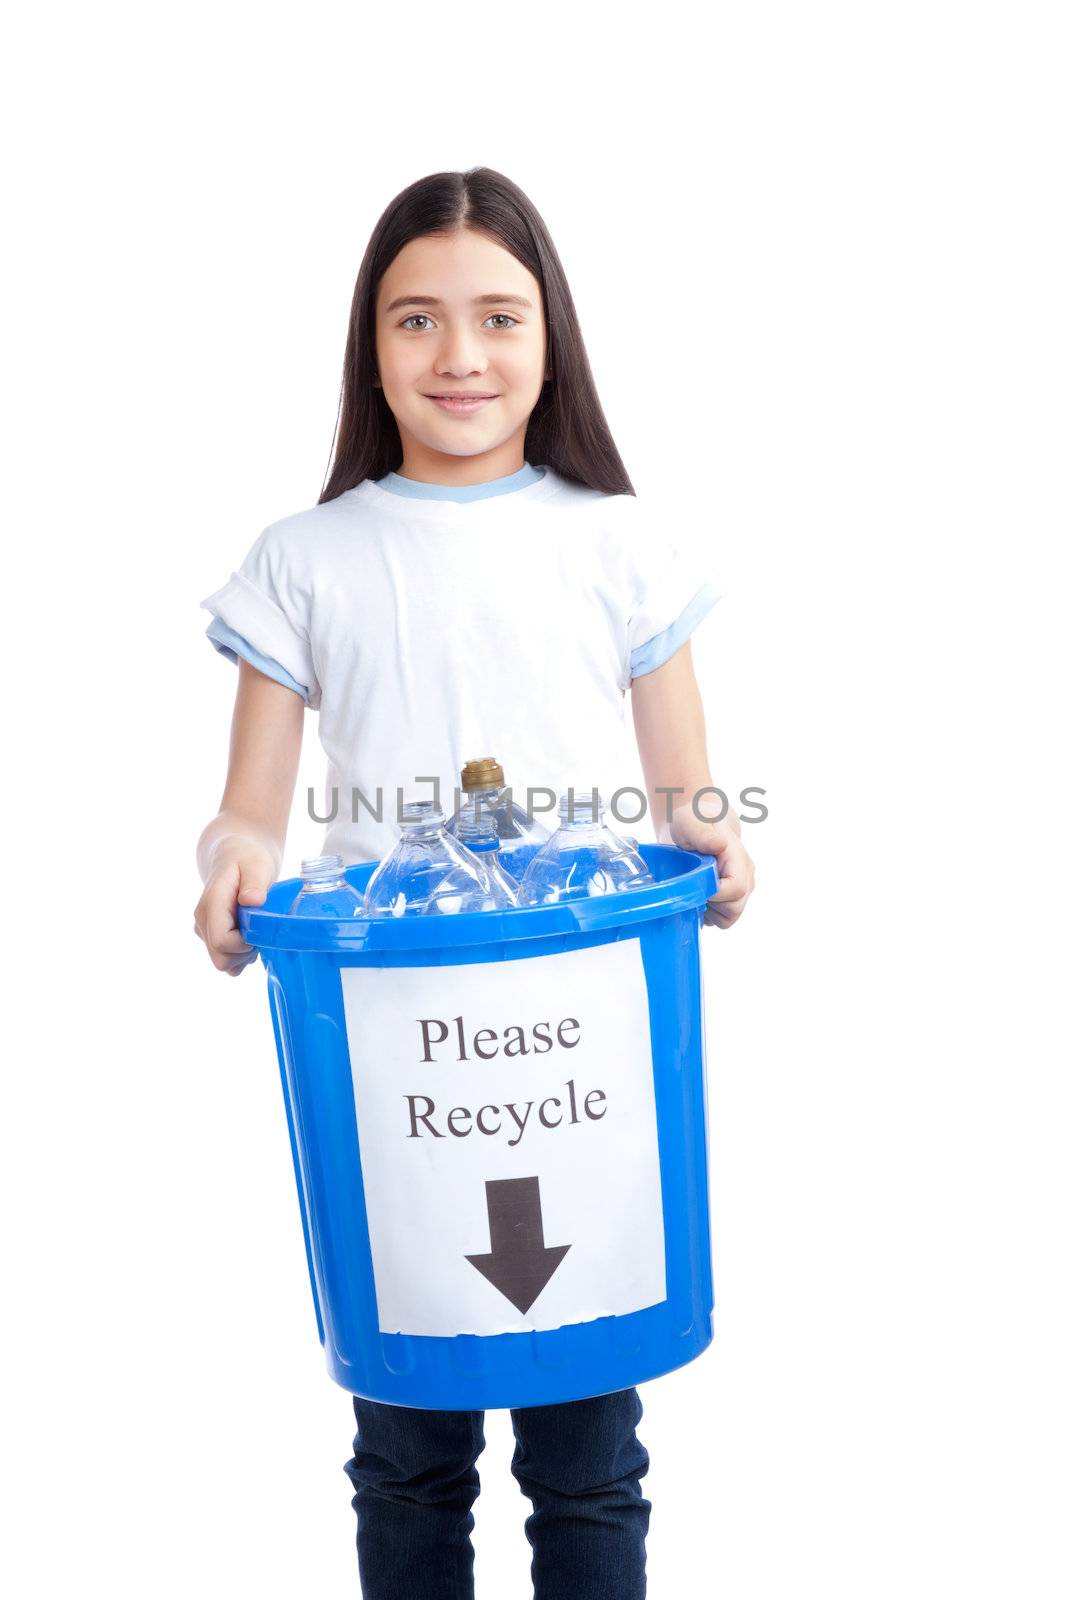 Young happy girl holding recycling waste bin.